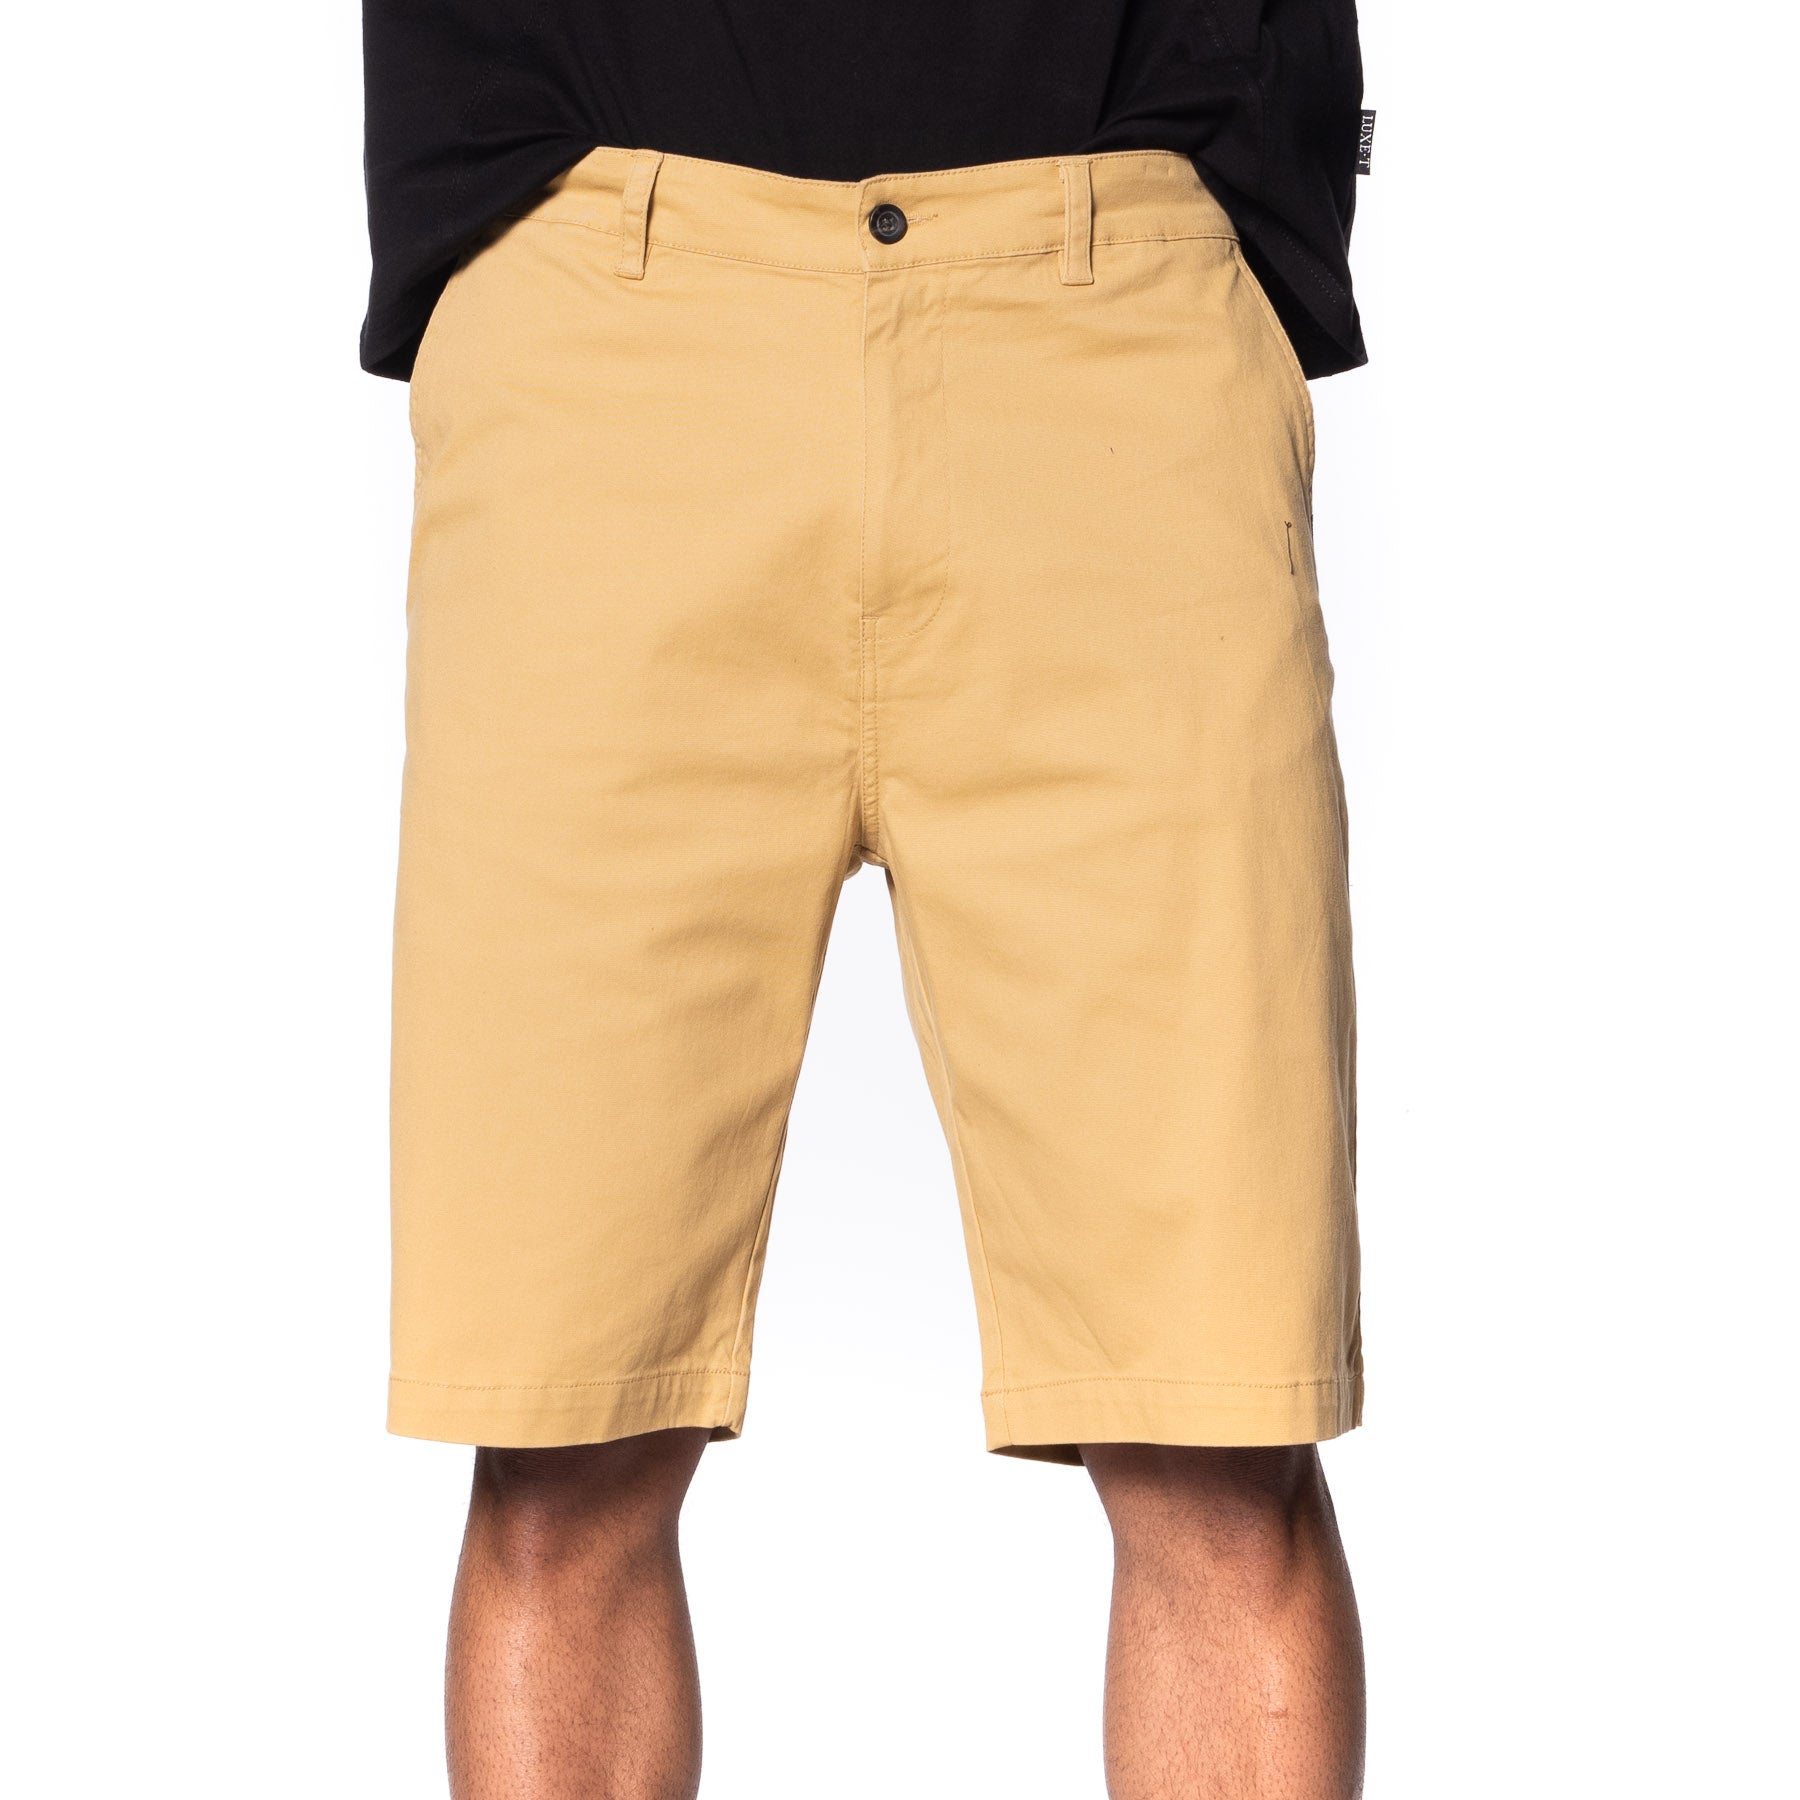 Woven Stretch Shorts